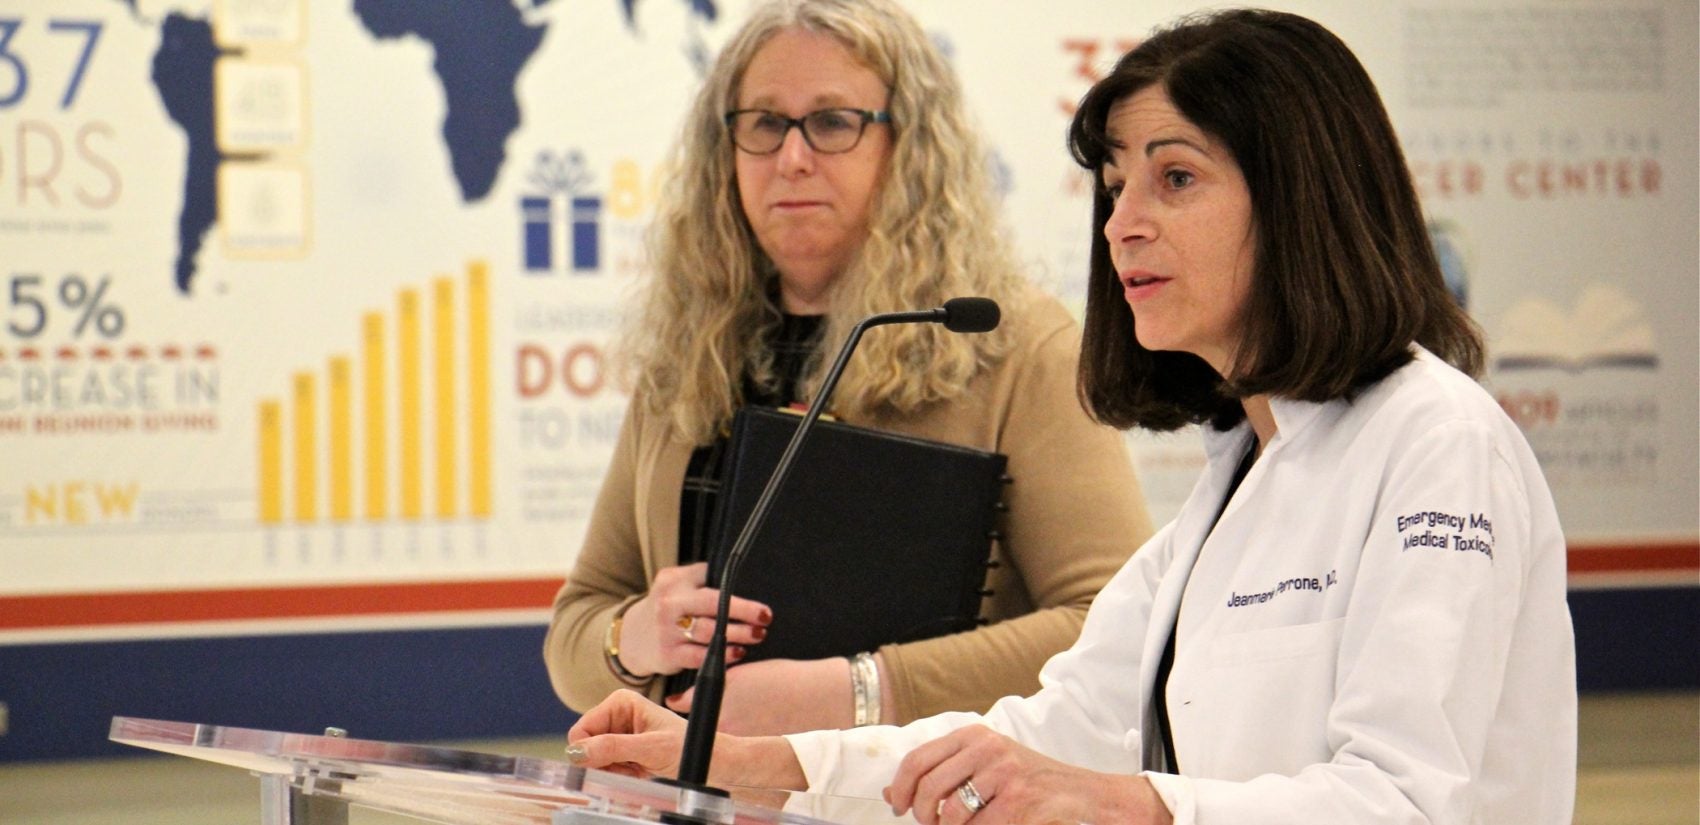 Emergency Dr. Jeanmarie Perrone (right) joins Pennsylvania Secretary of Health Dr. Rachel Levine to announce new prescription guidelines for emergency room doctors dealing with opioids and opioid addiction.